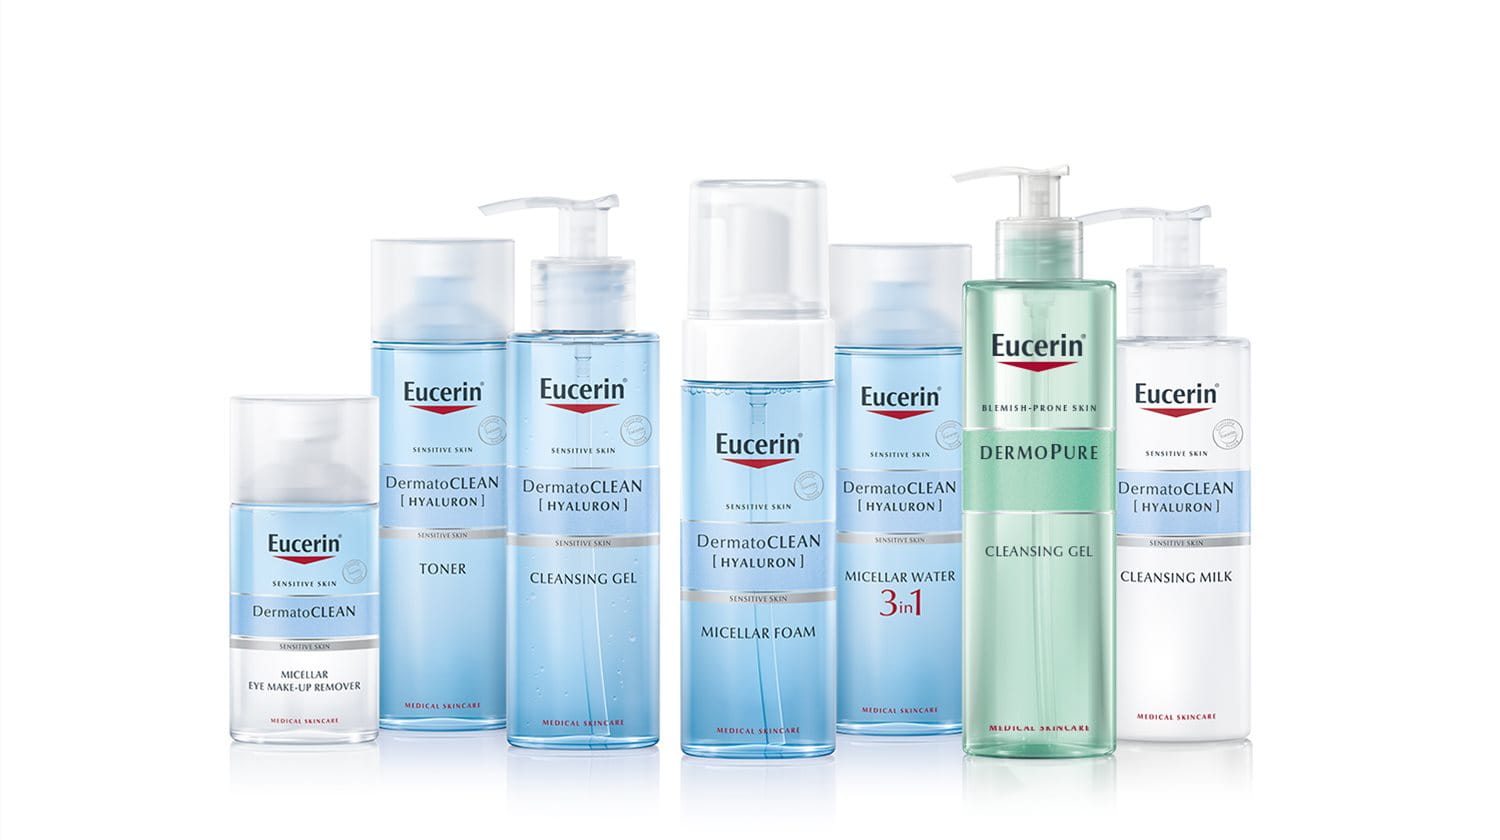 Eucerin products arranged in a line.